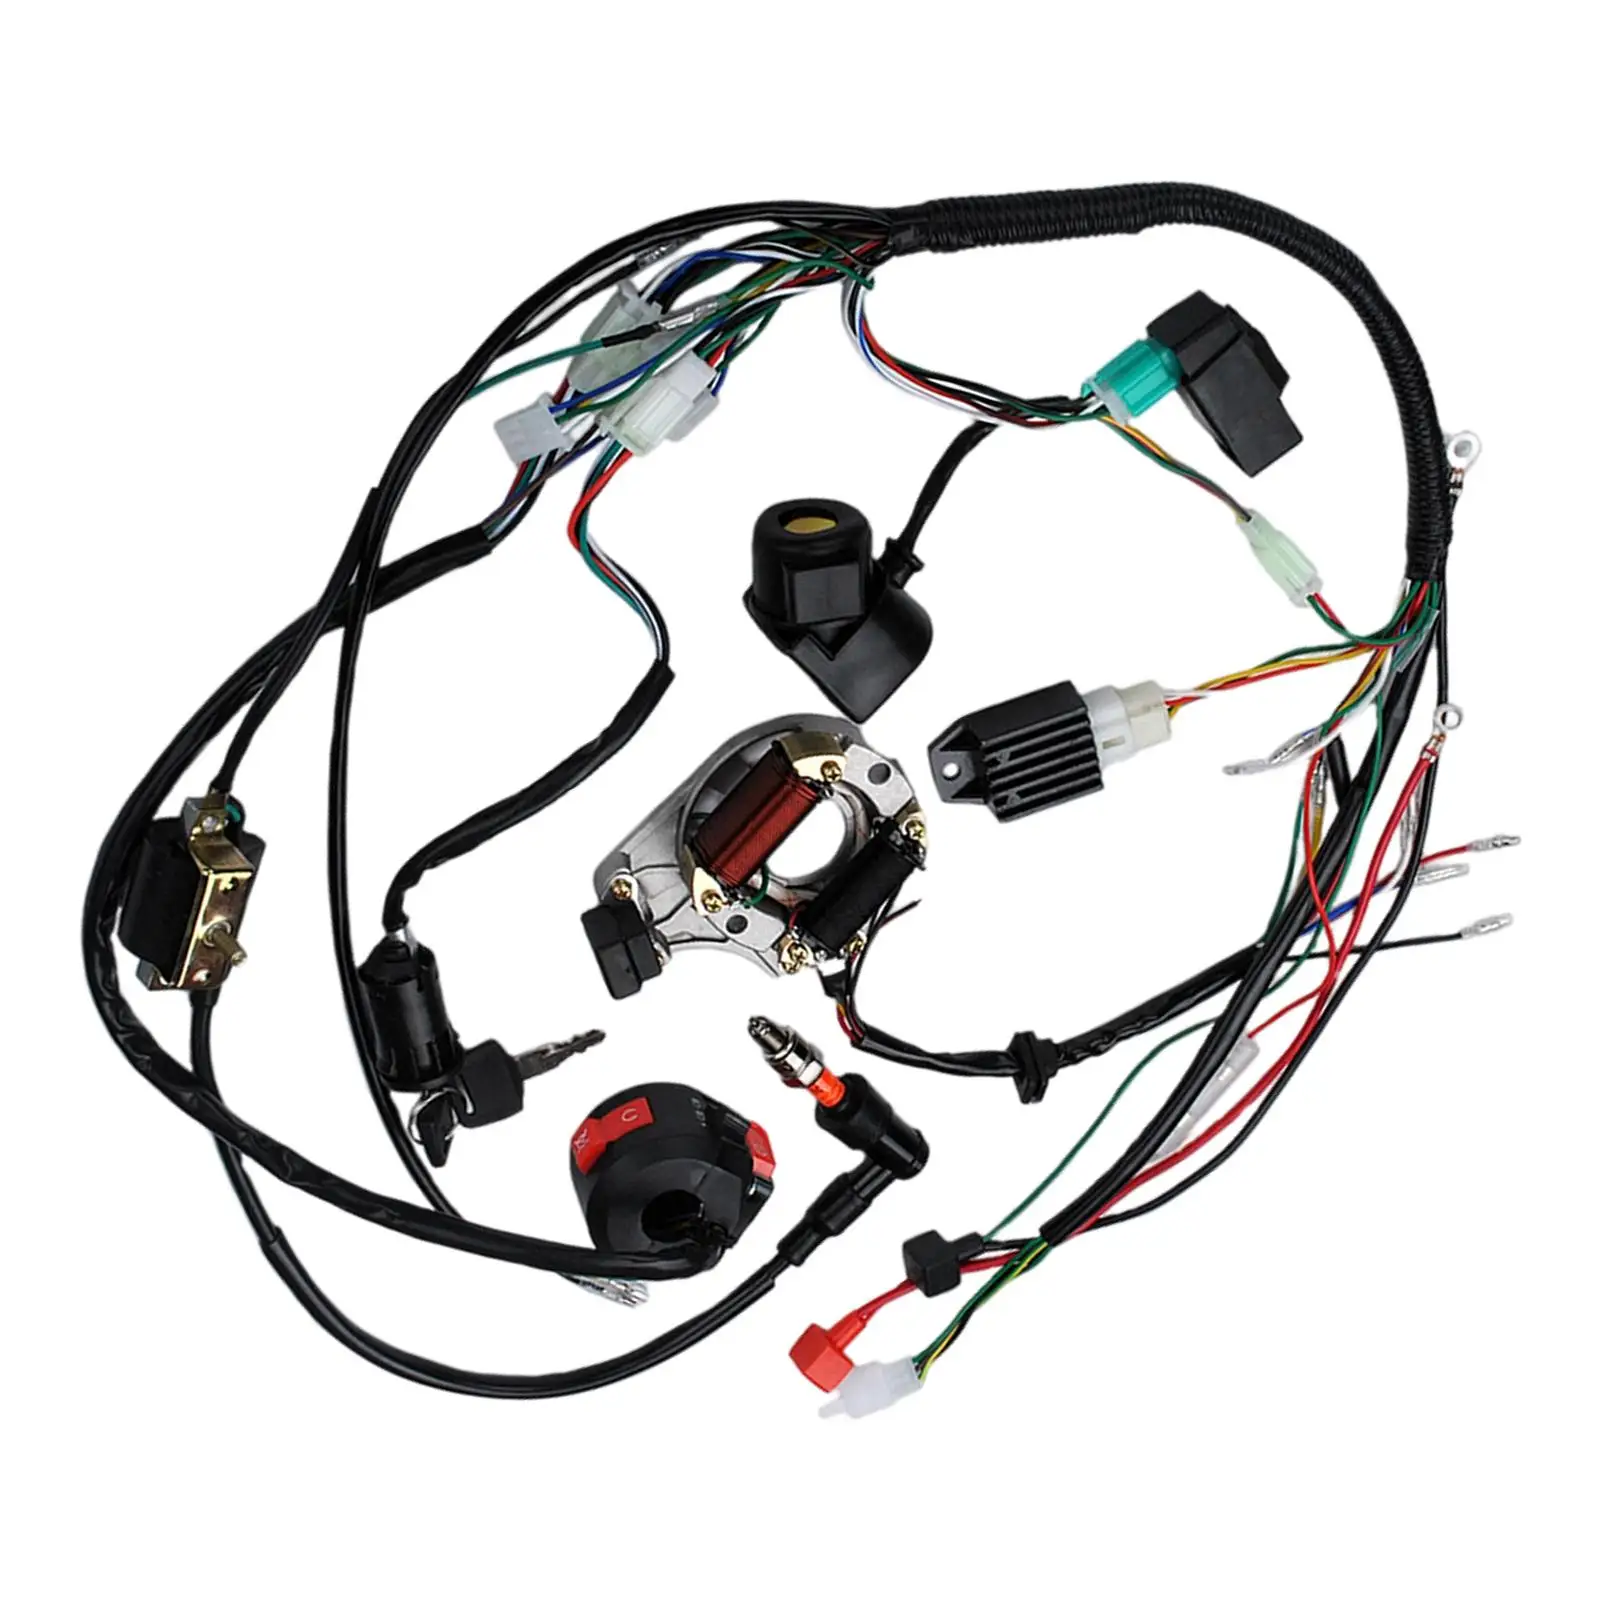 Complete Electrics Wire Harness Kit Solenoid Relay Coil for Dirt Bike Scooter Buggy 4 Wheelers Stroke 50cc 70cc 110cc 125cc